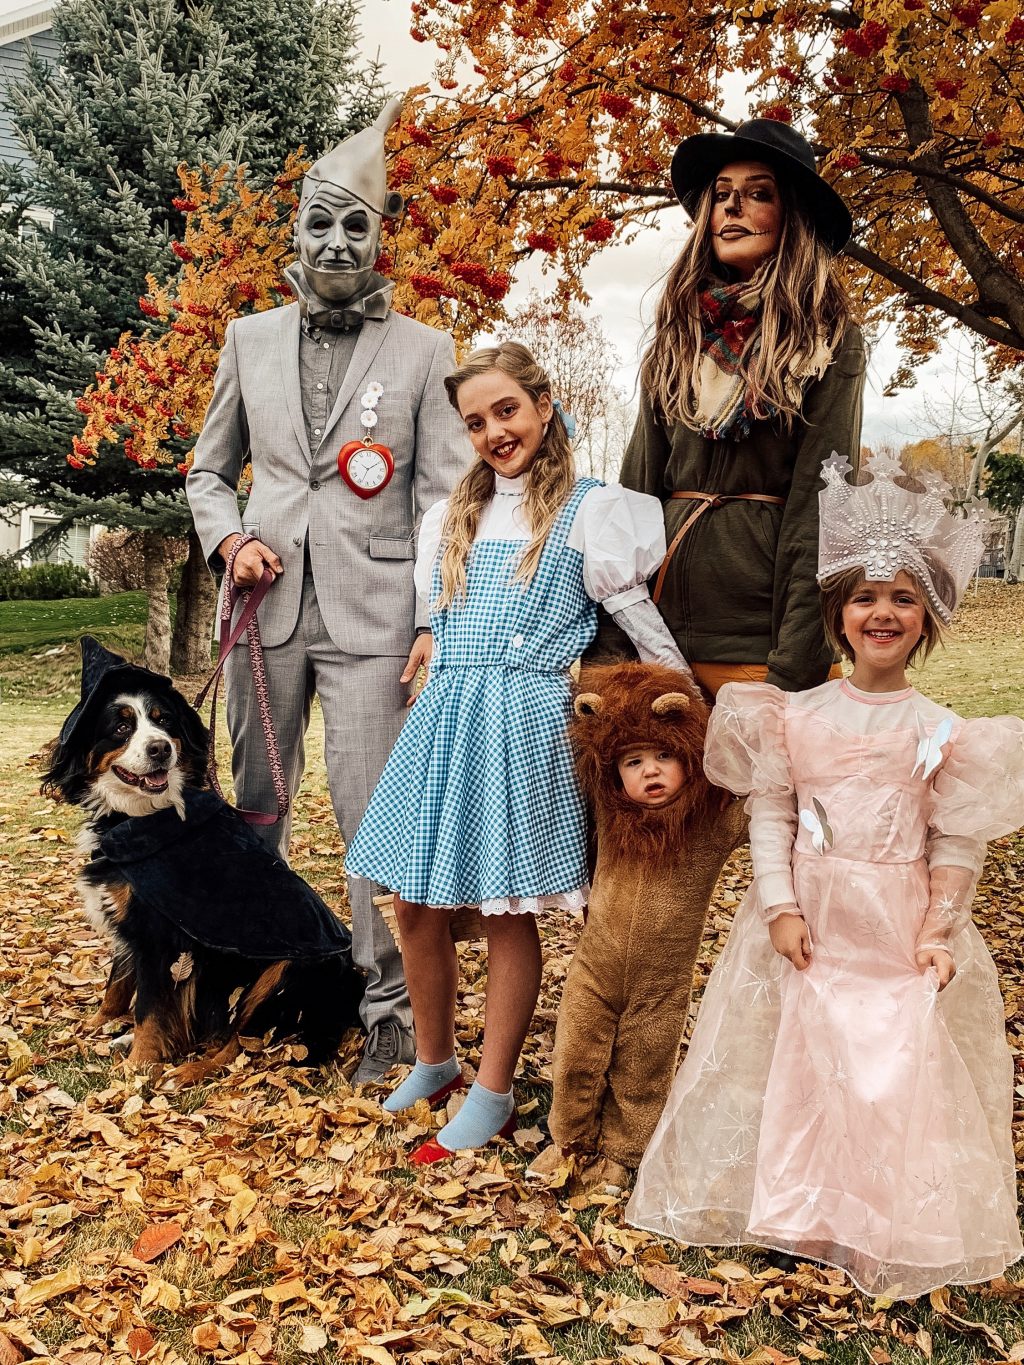 Our Halloween Family Costume 2018: The Wizard of Oz - Chris Loves Julia